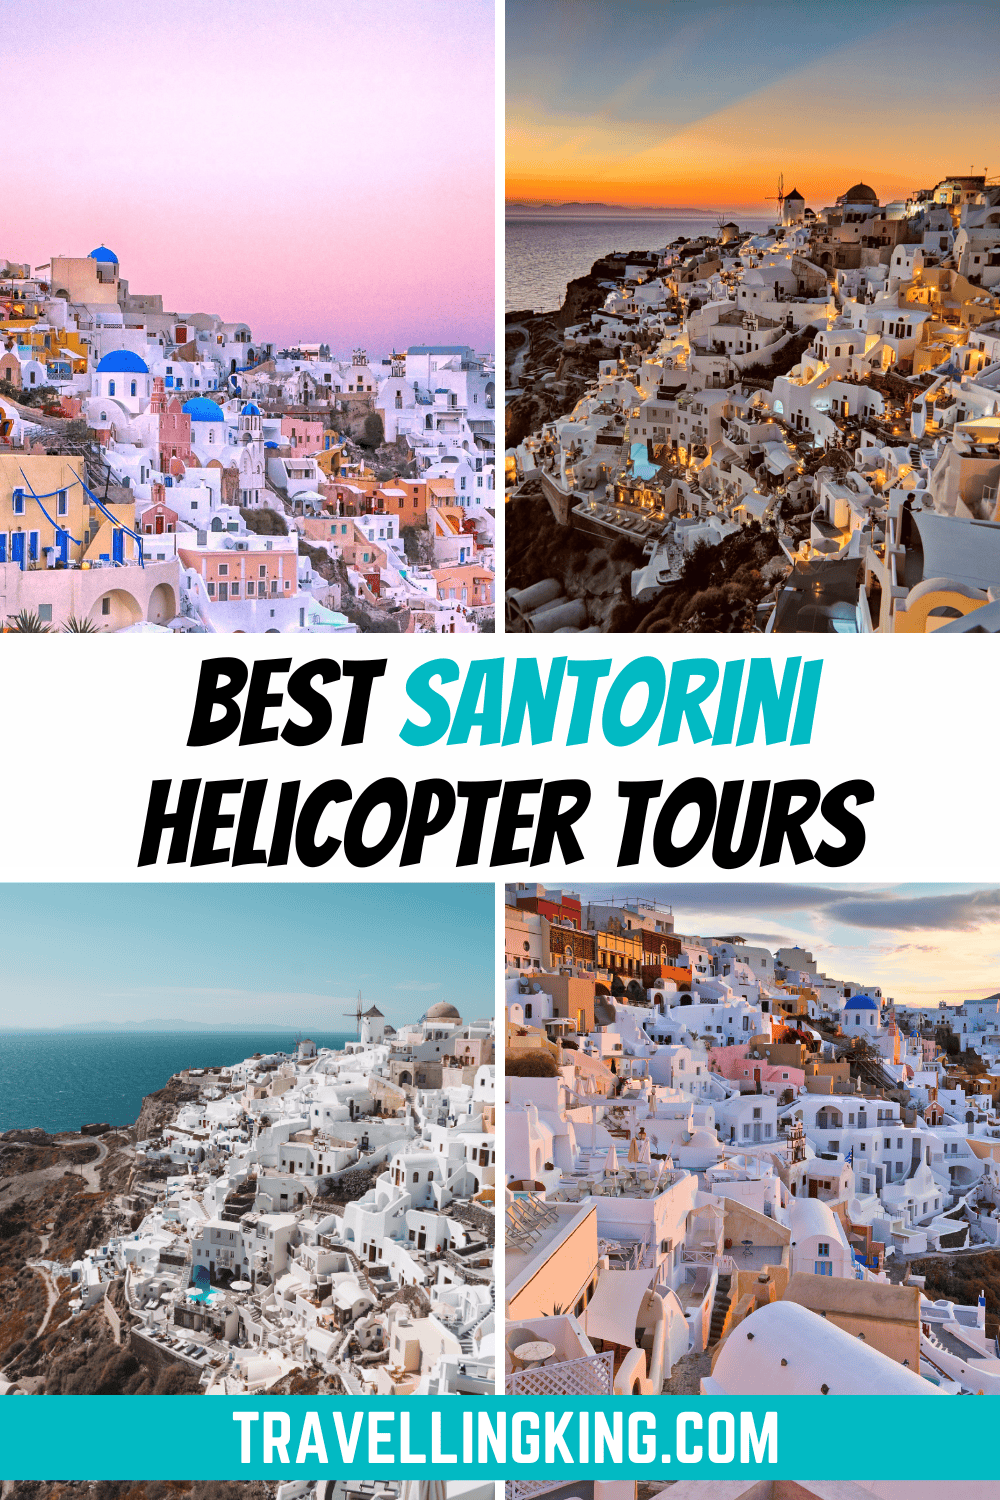 Best Santorini Helicopter Tours 